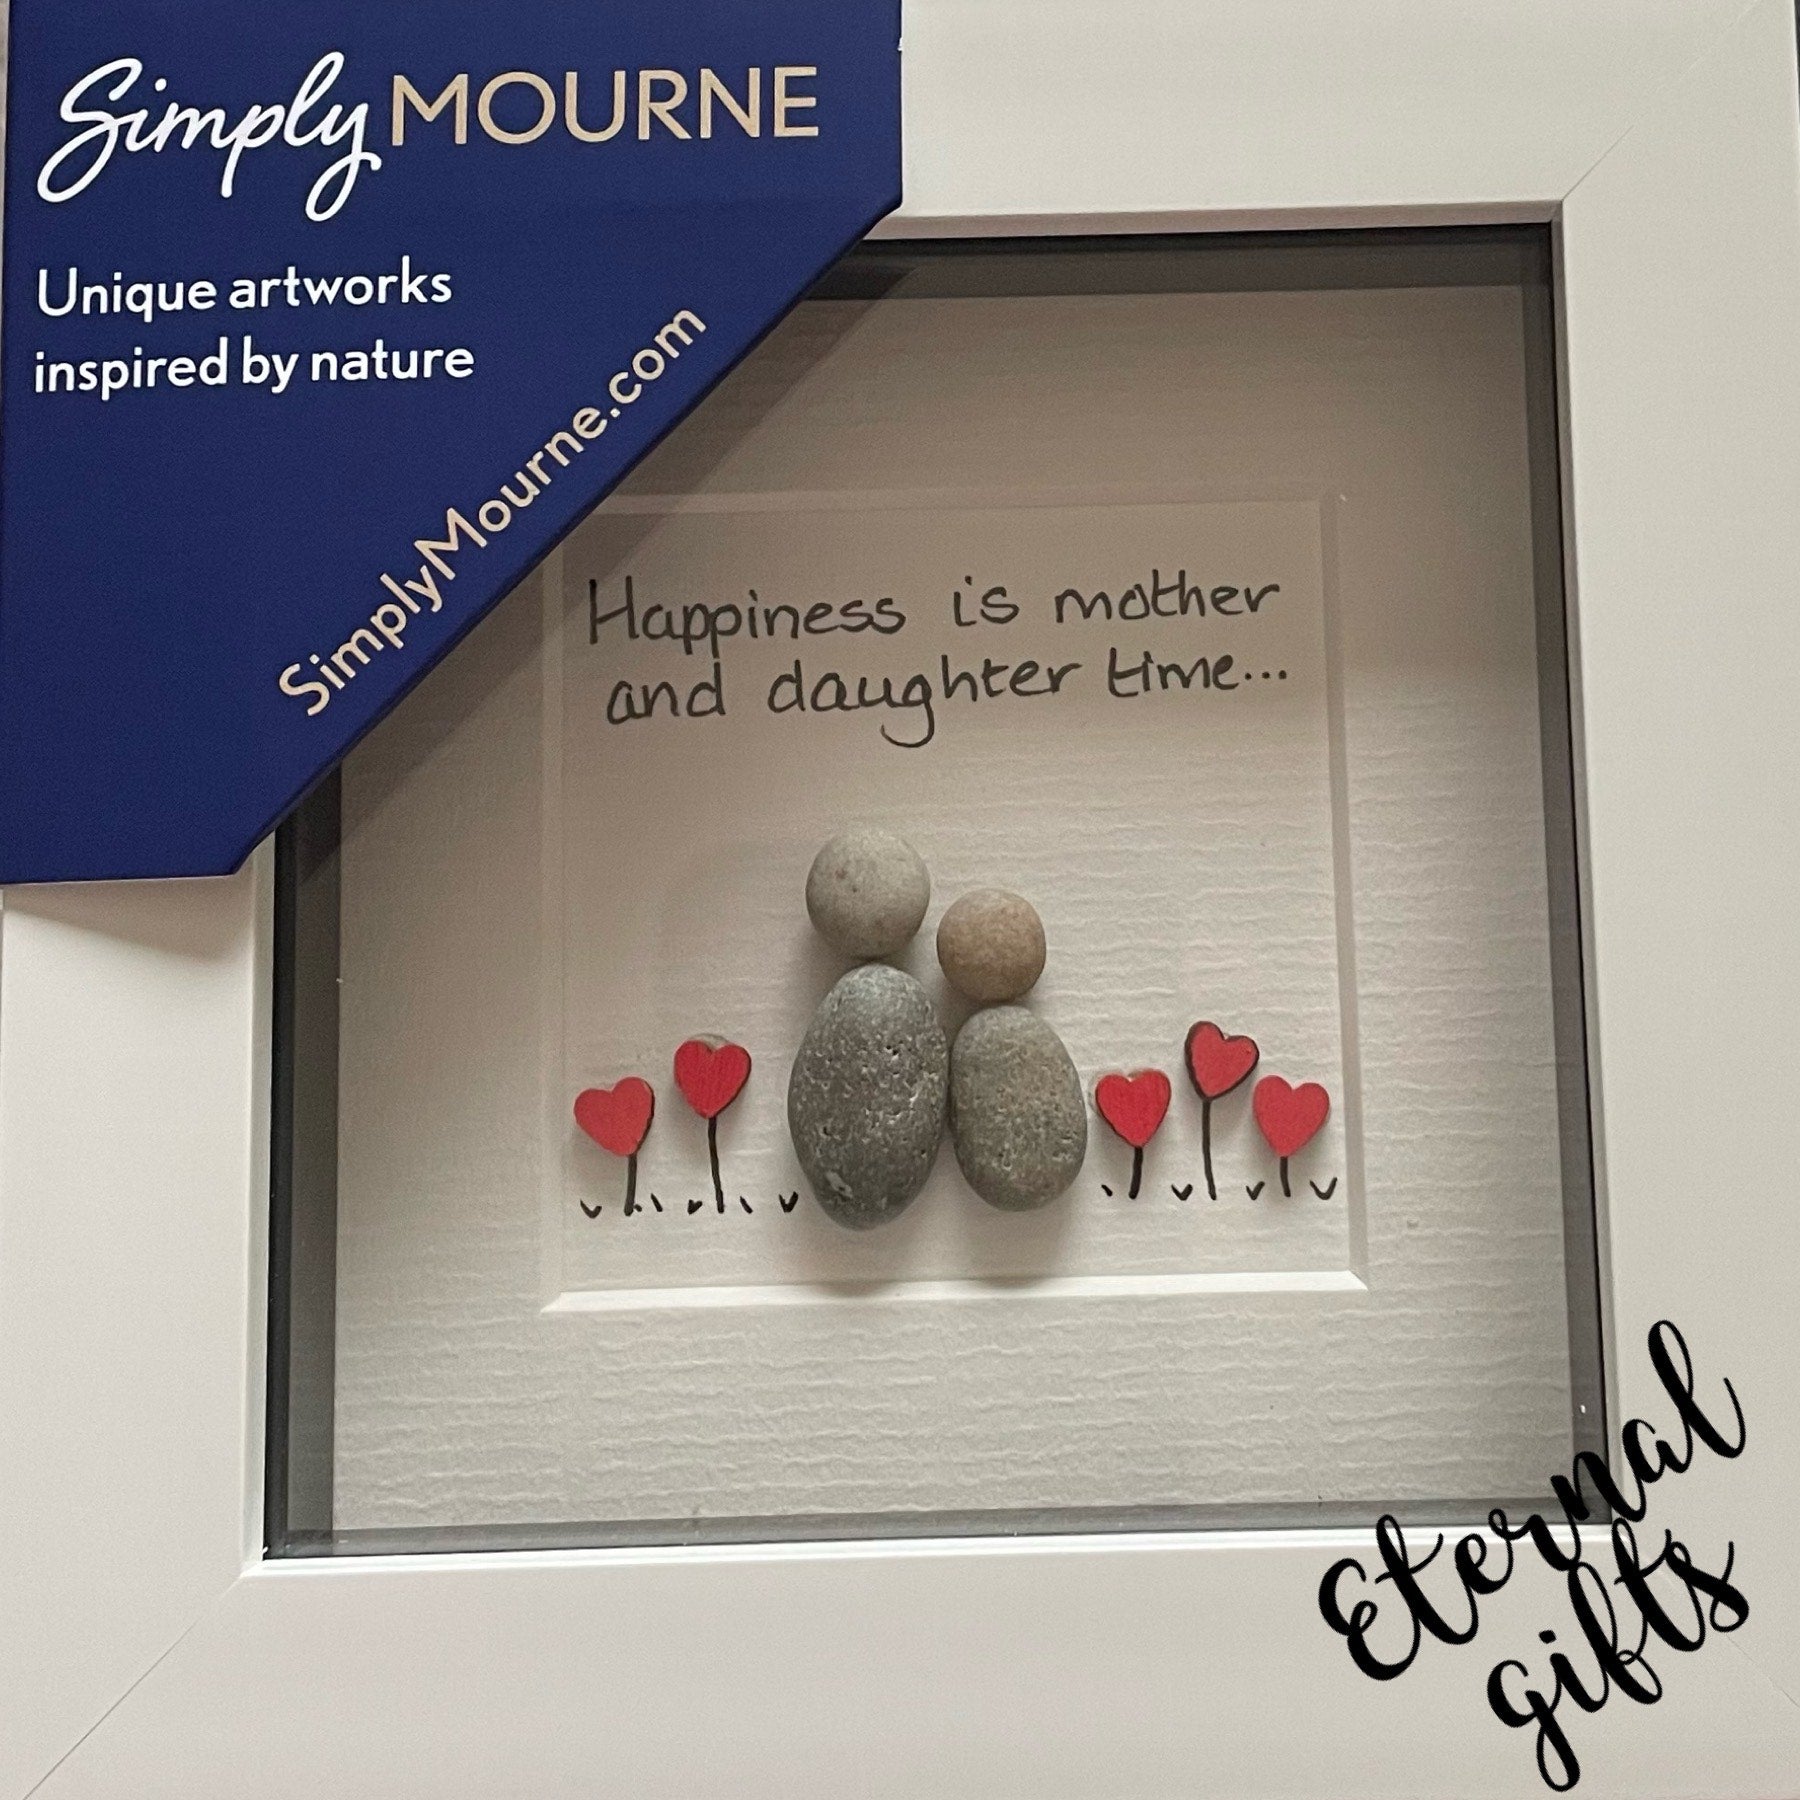 Happiness is mother and daughter time Pebble Art By Simply Mourne (Small)